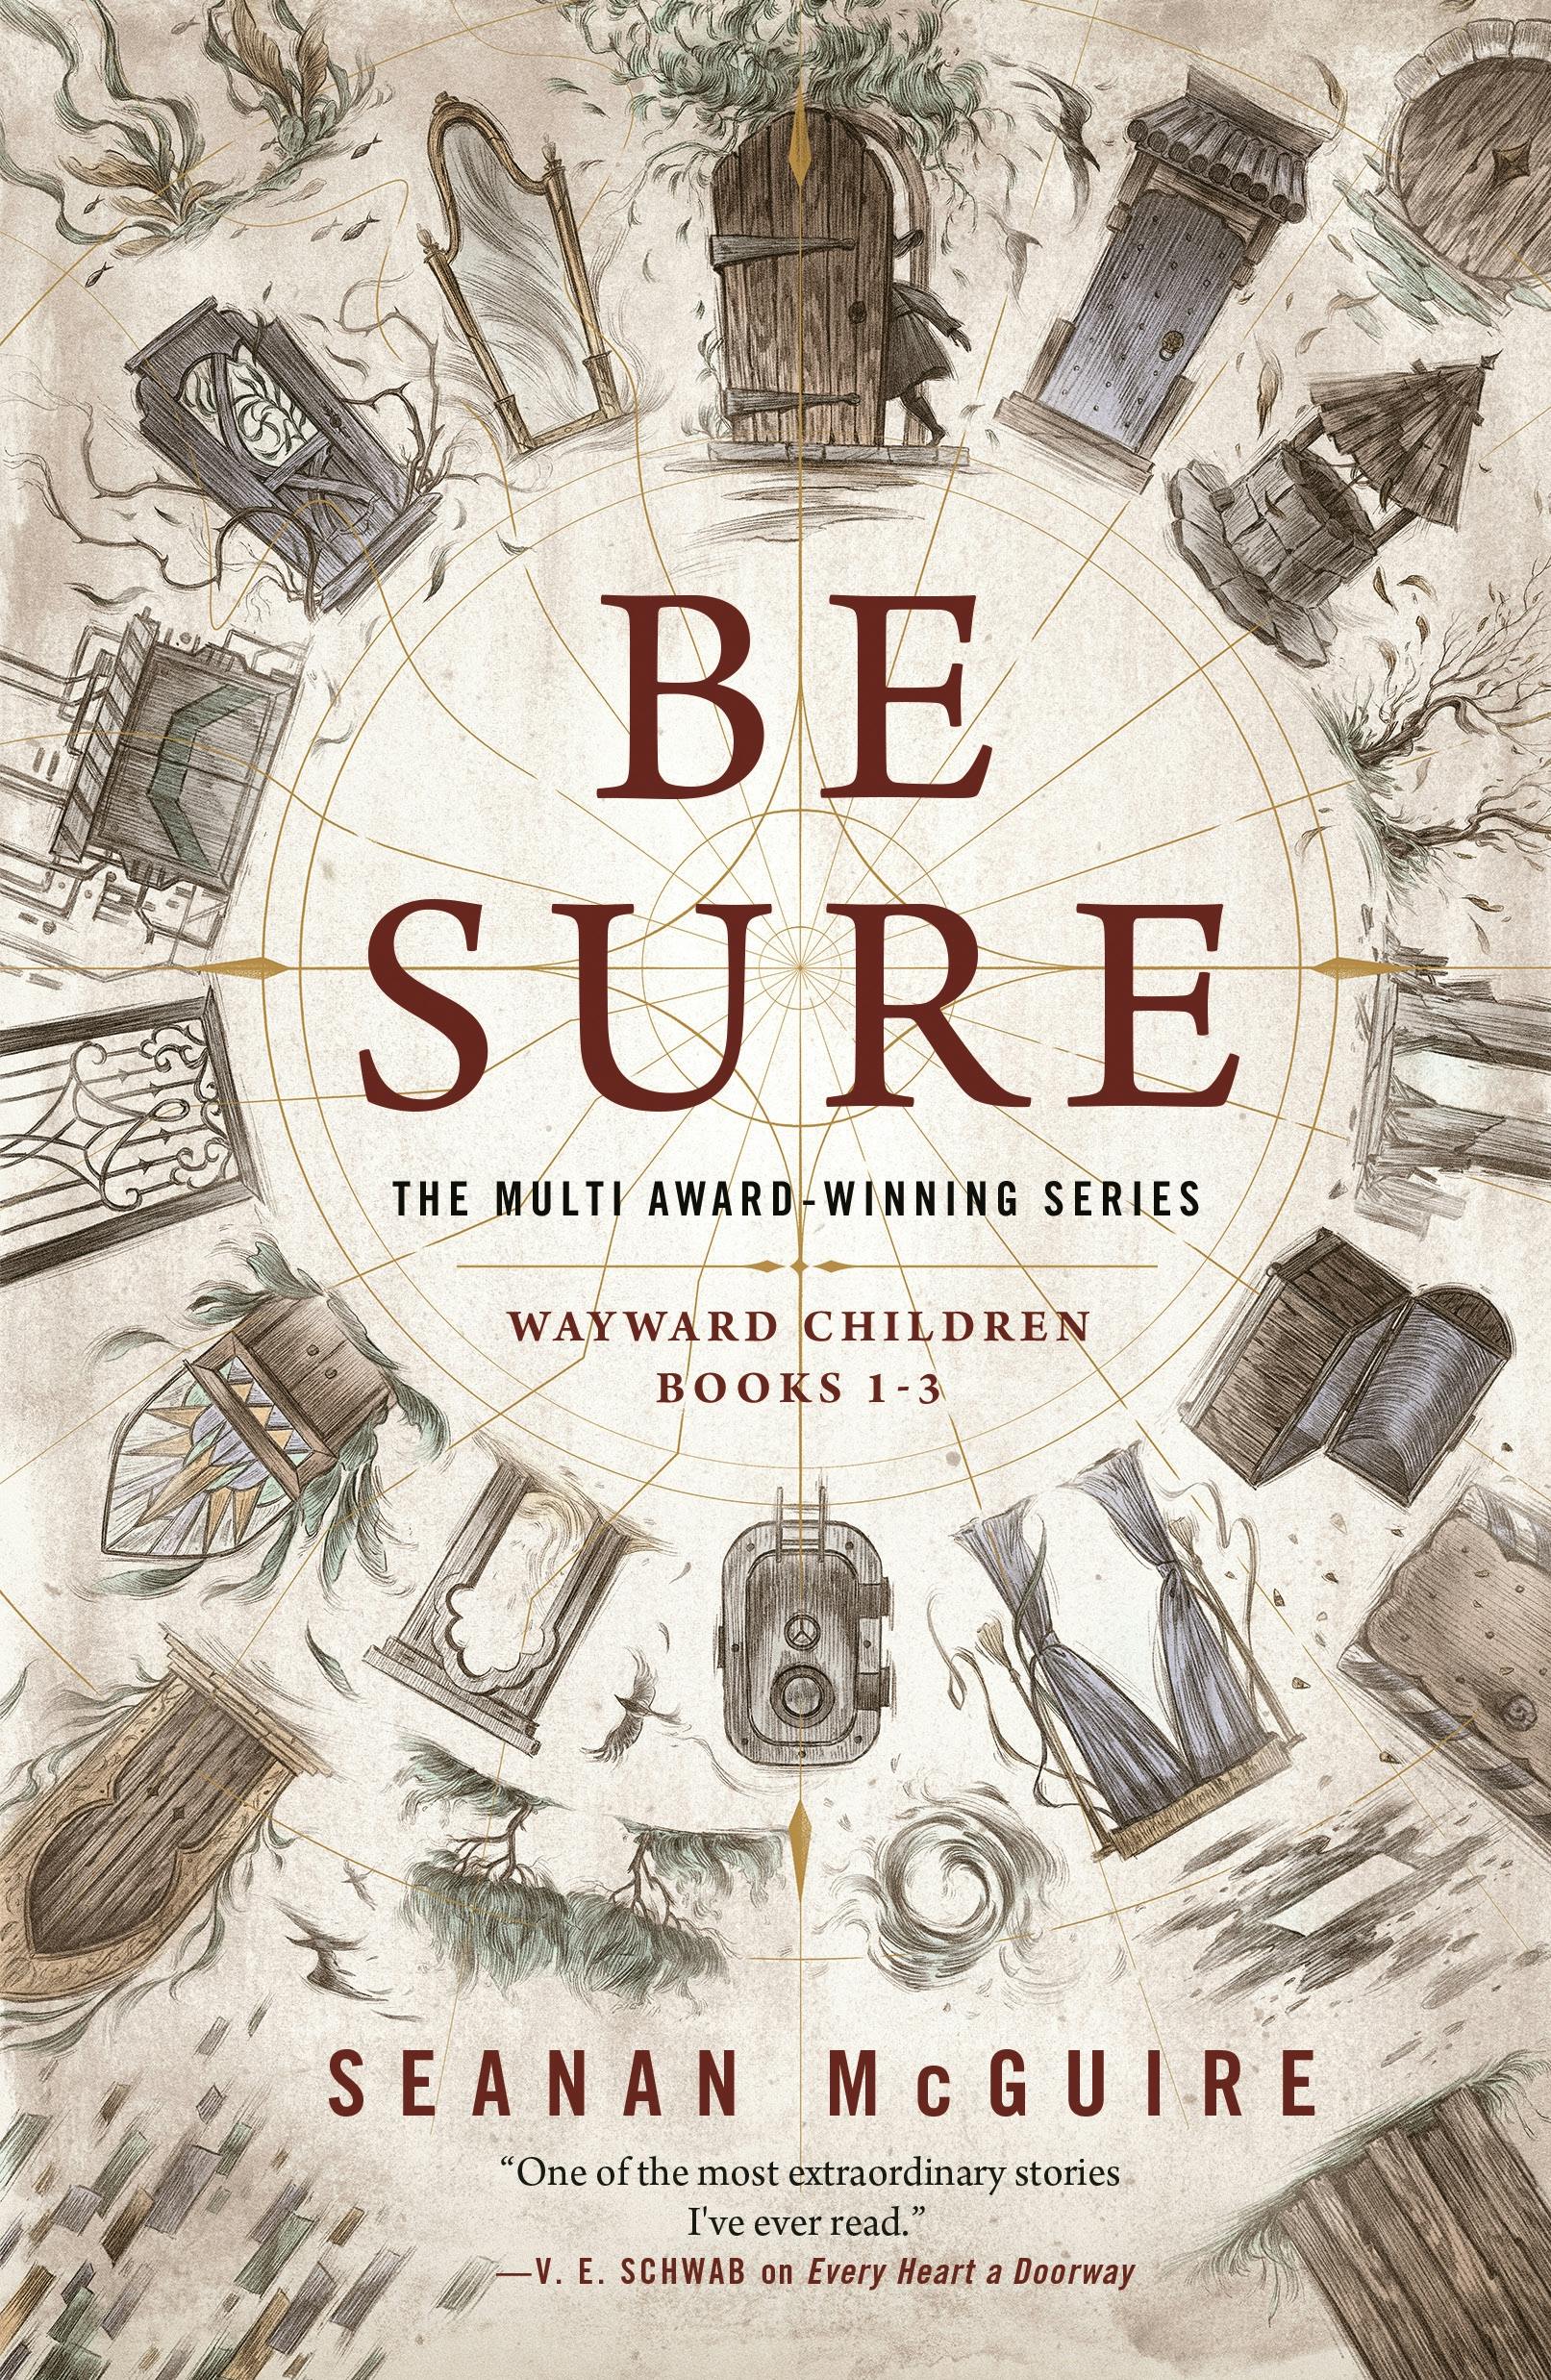 Cover for the book titled as: Be Sure